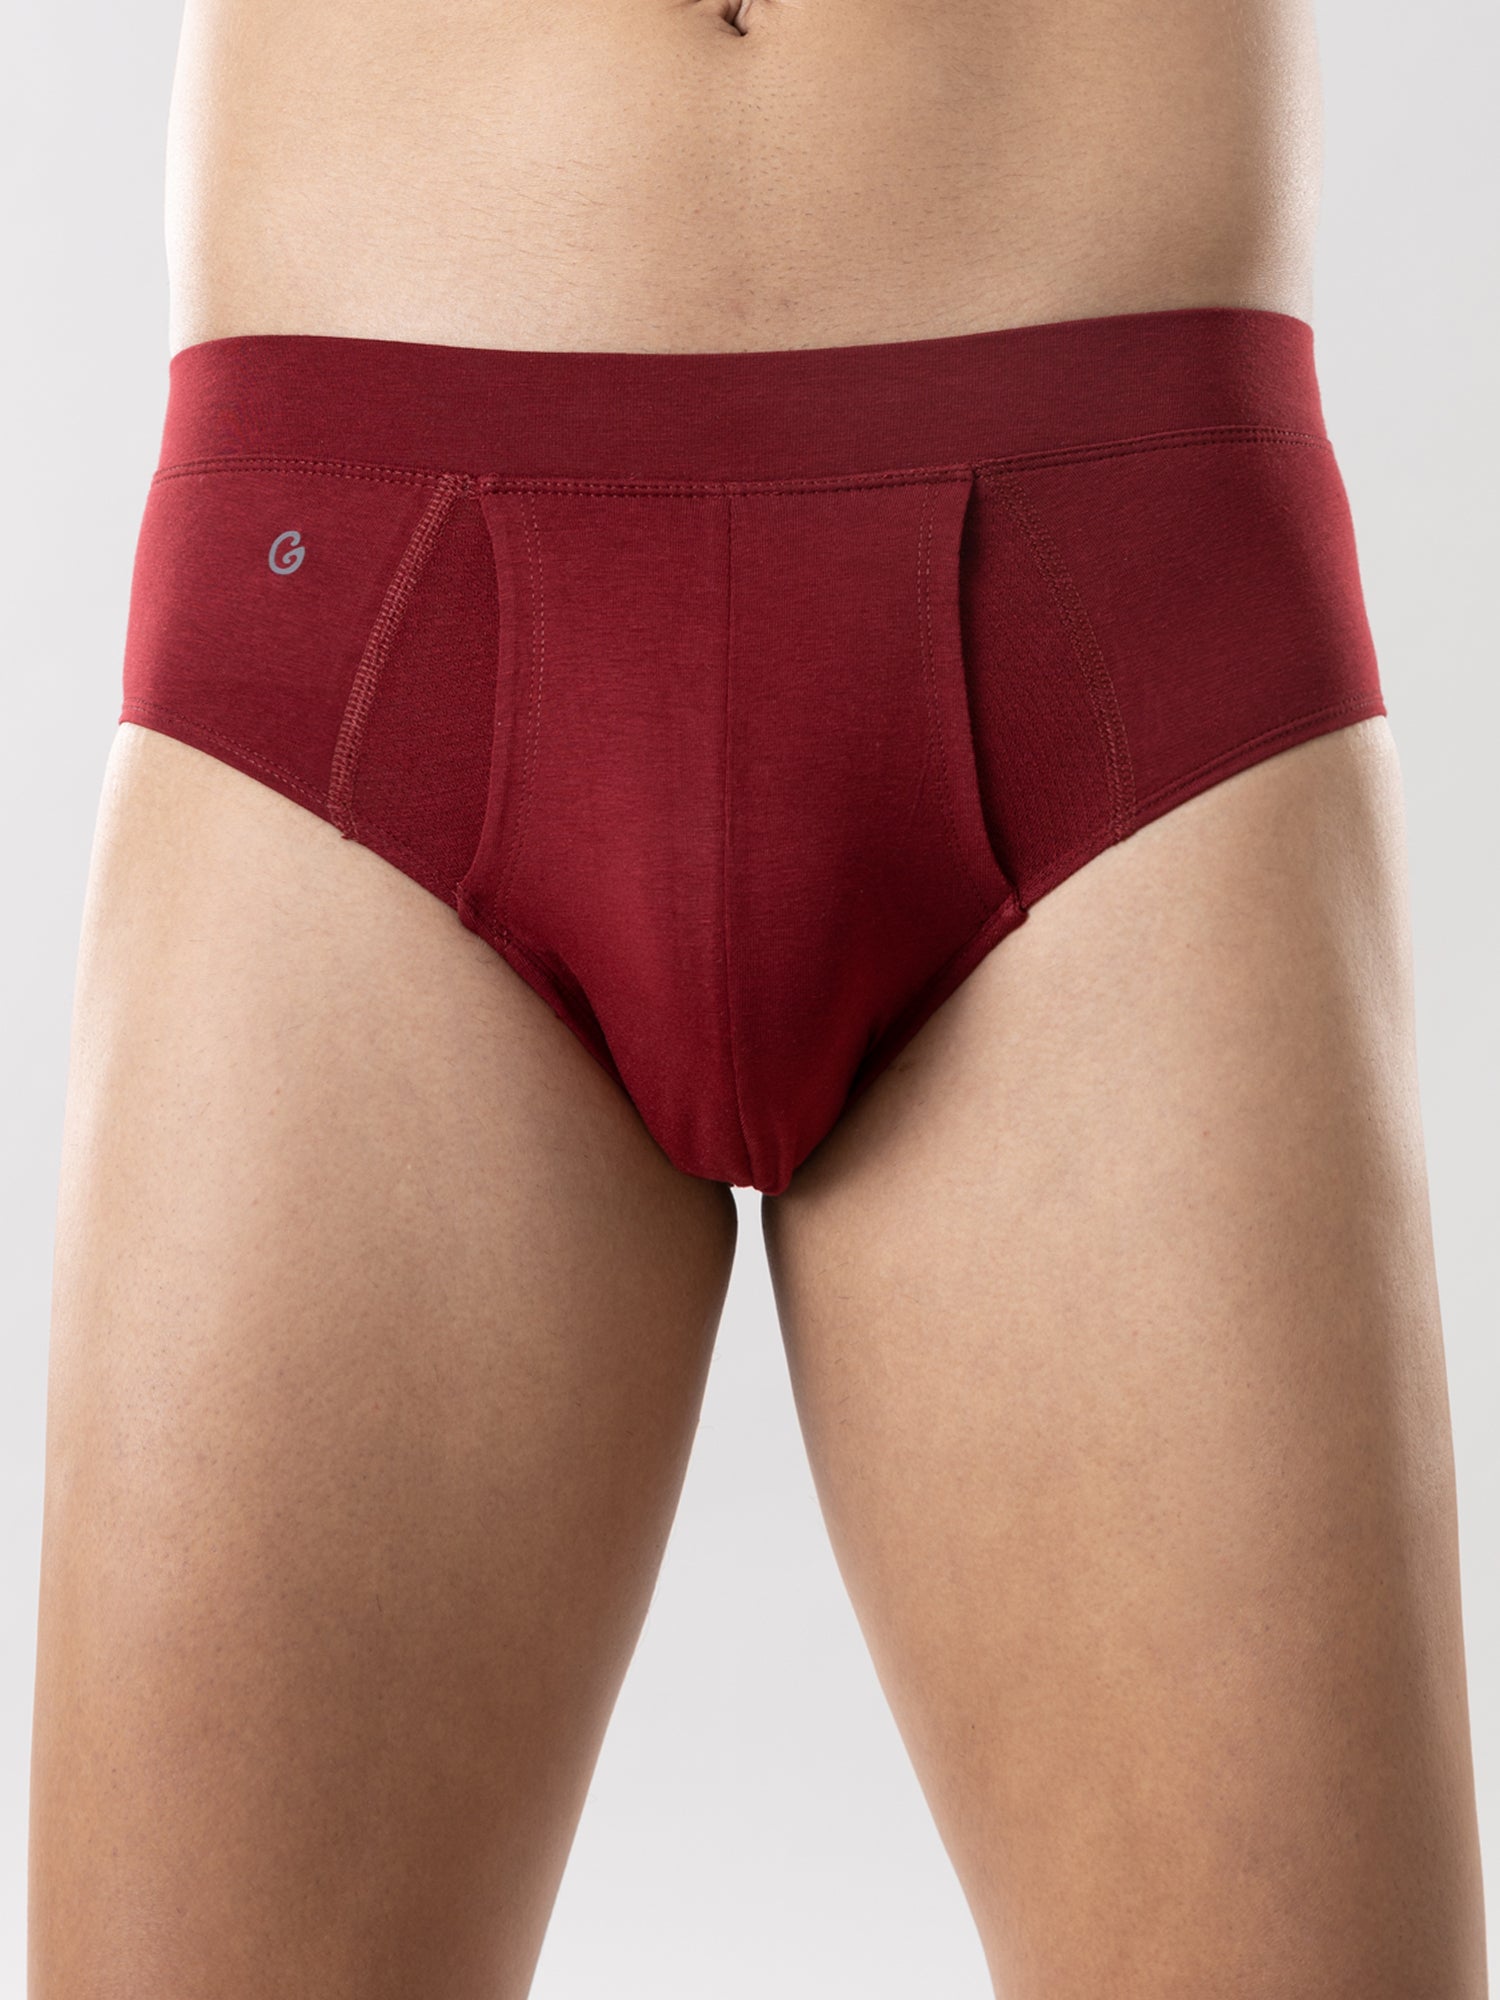 Are Men's Briefs the Best Underwear Choice for Active Lifestyles?, by Amit  Kumar